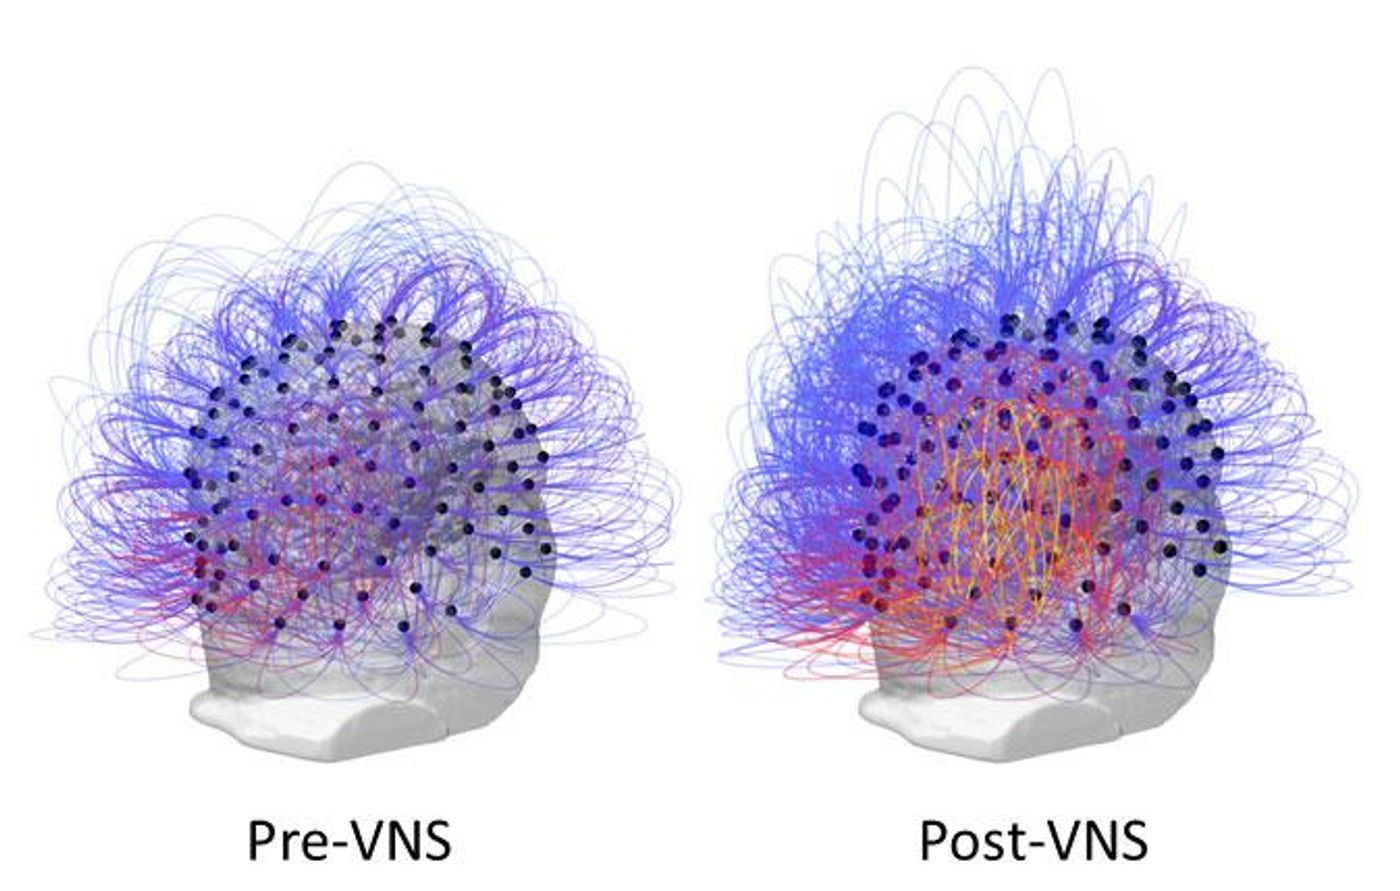 This figure shows information sharing across all electrodes before and after vagus nerve stimulation (VNS). On the right, the warmer colors (yellow/orange) indicate an increase of connectivity among posterior parietal regions. / Credit: Corazzol et al.